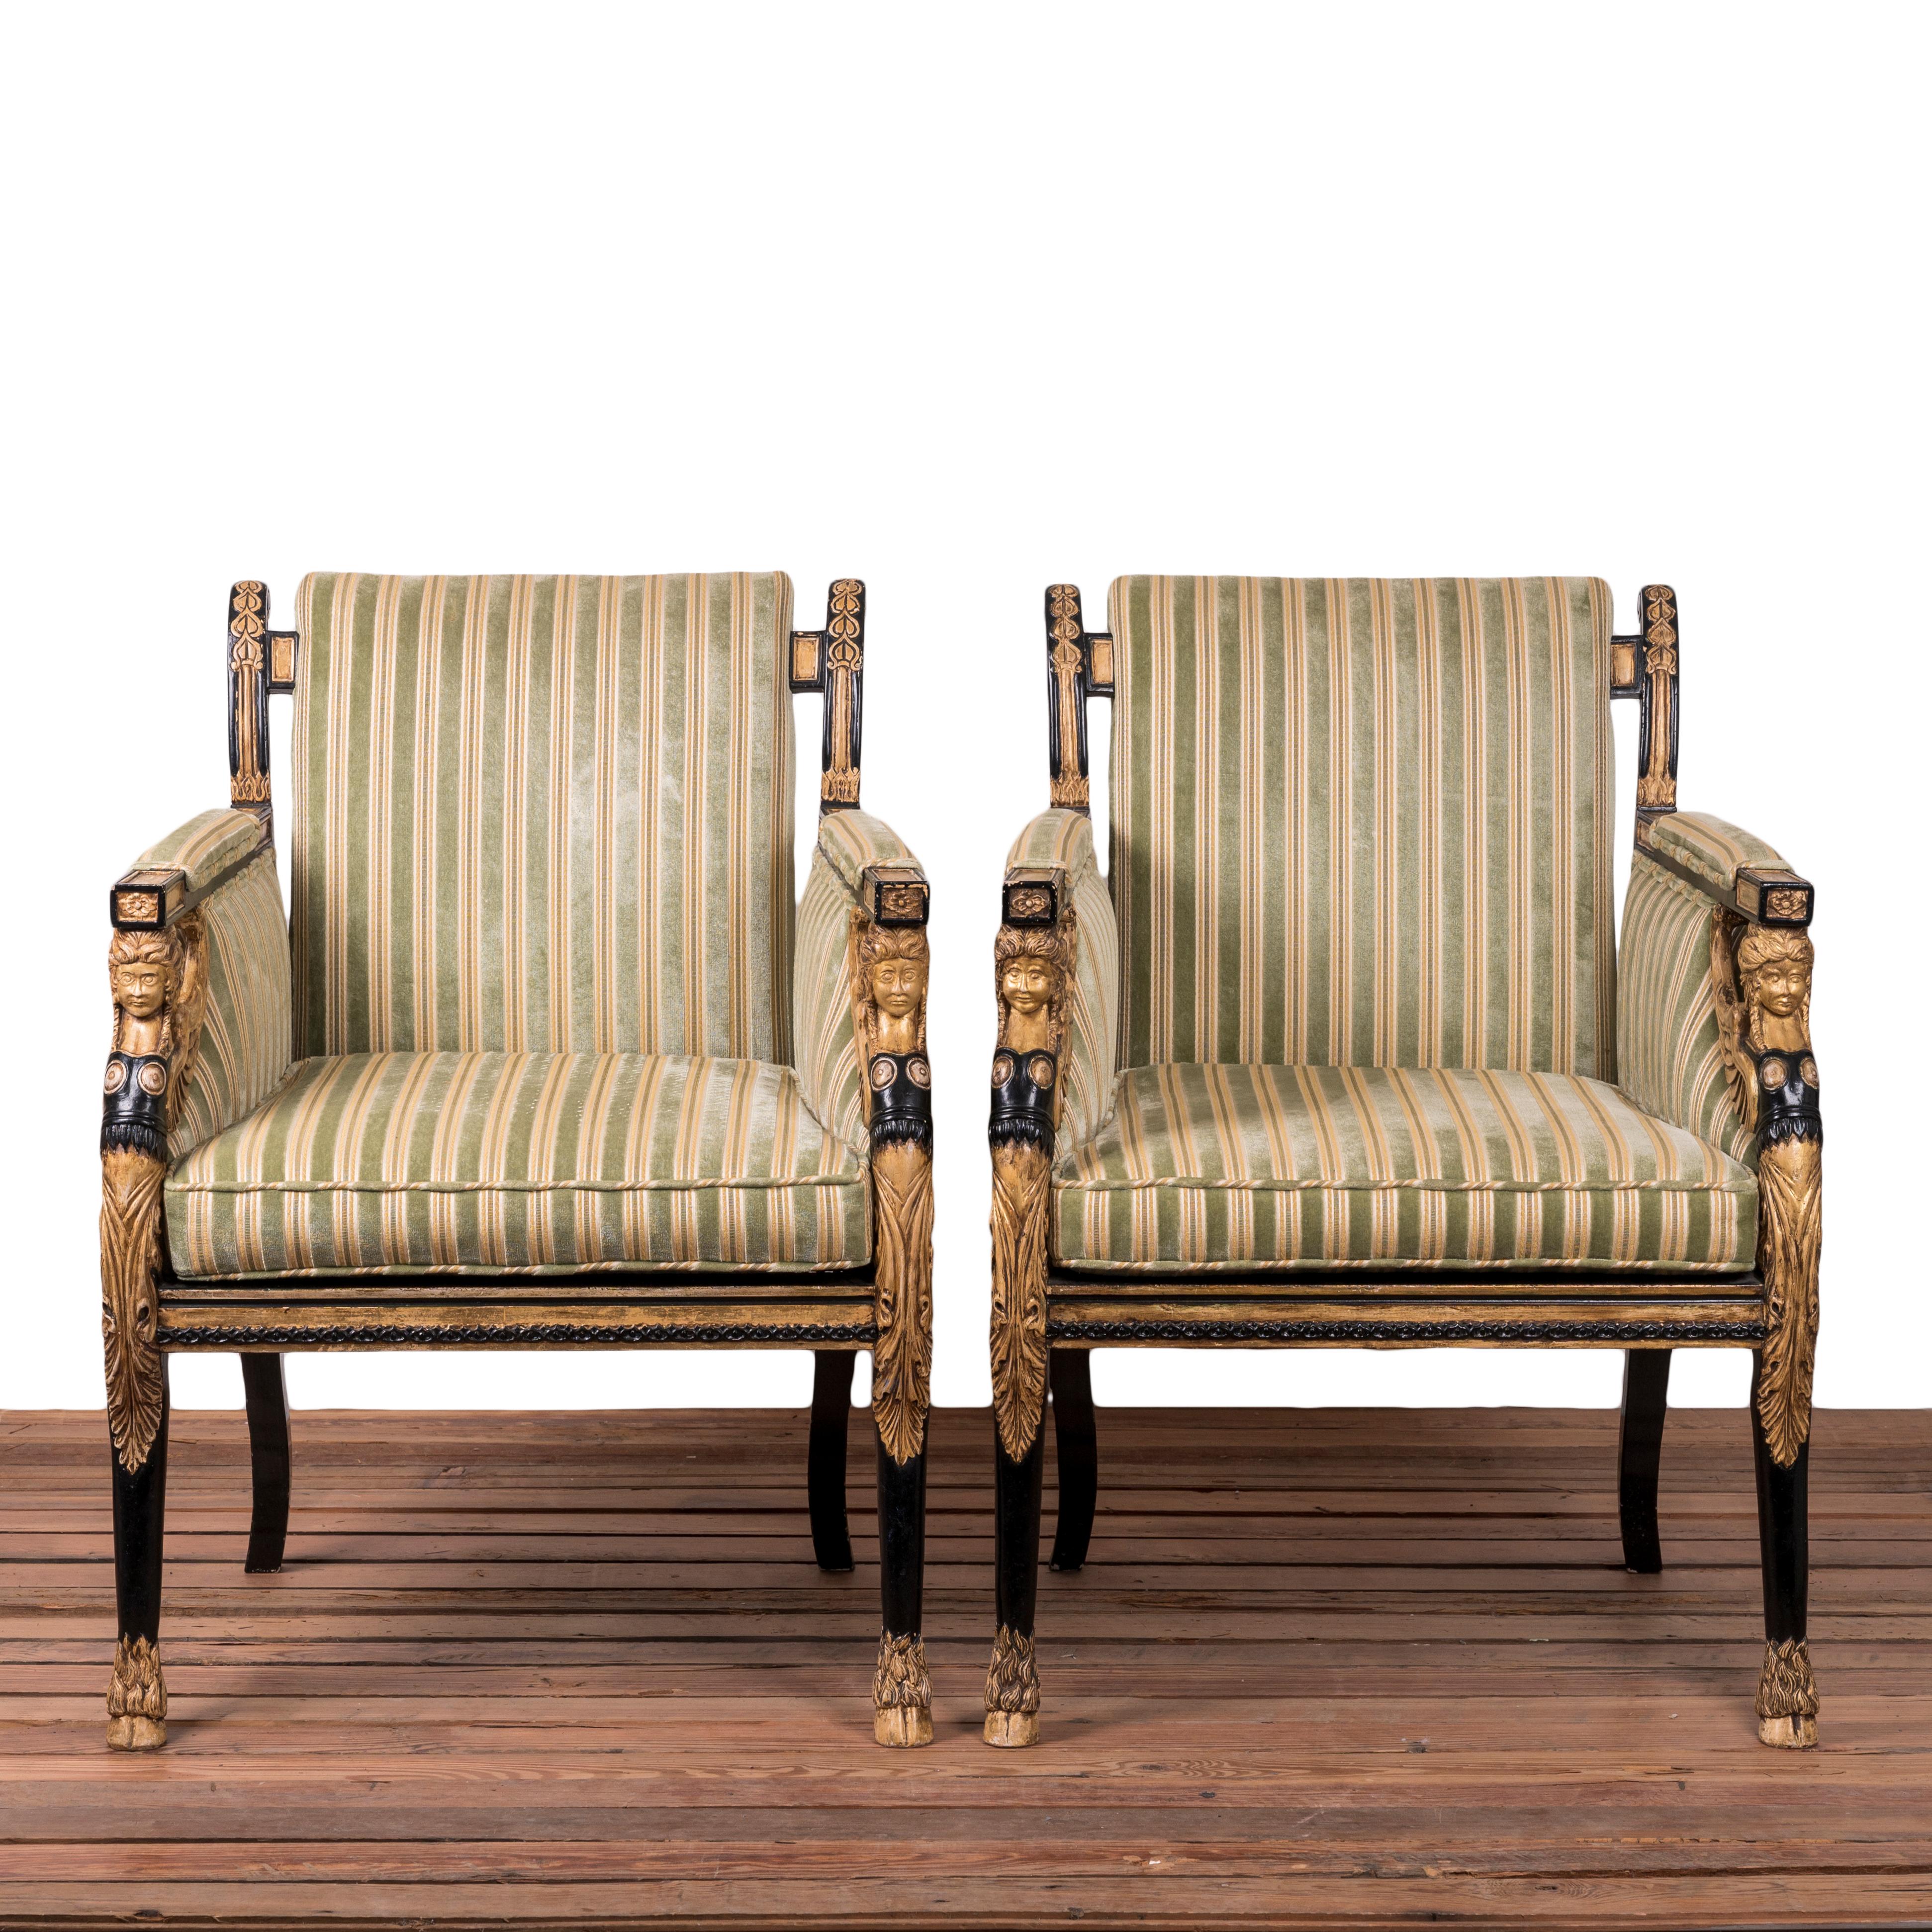 English Regency Style Ebonized and Parcel Gilt Chairs - A Pair In Good Condition For Sale In Savannah, GA